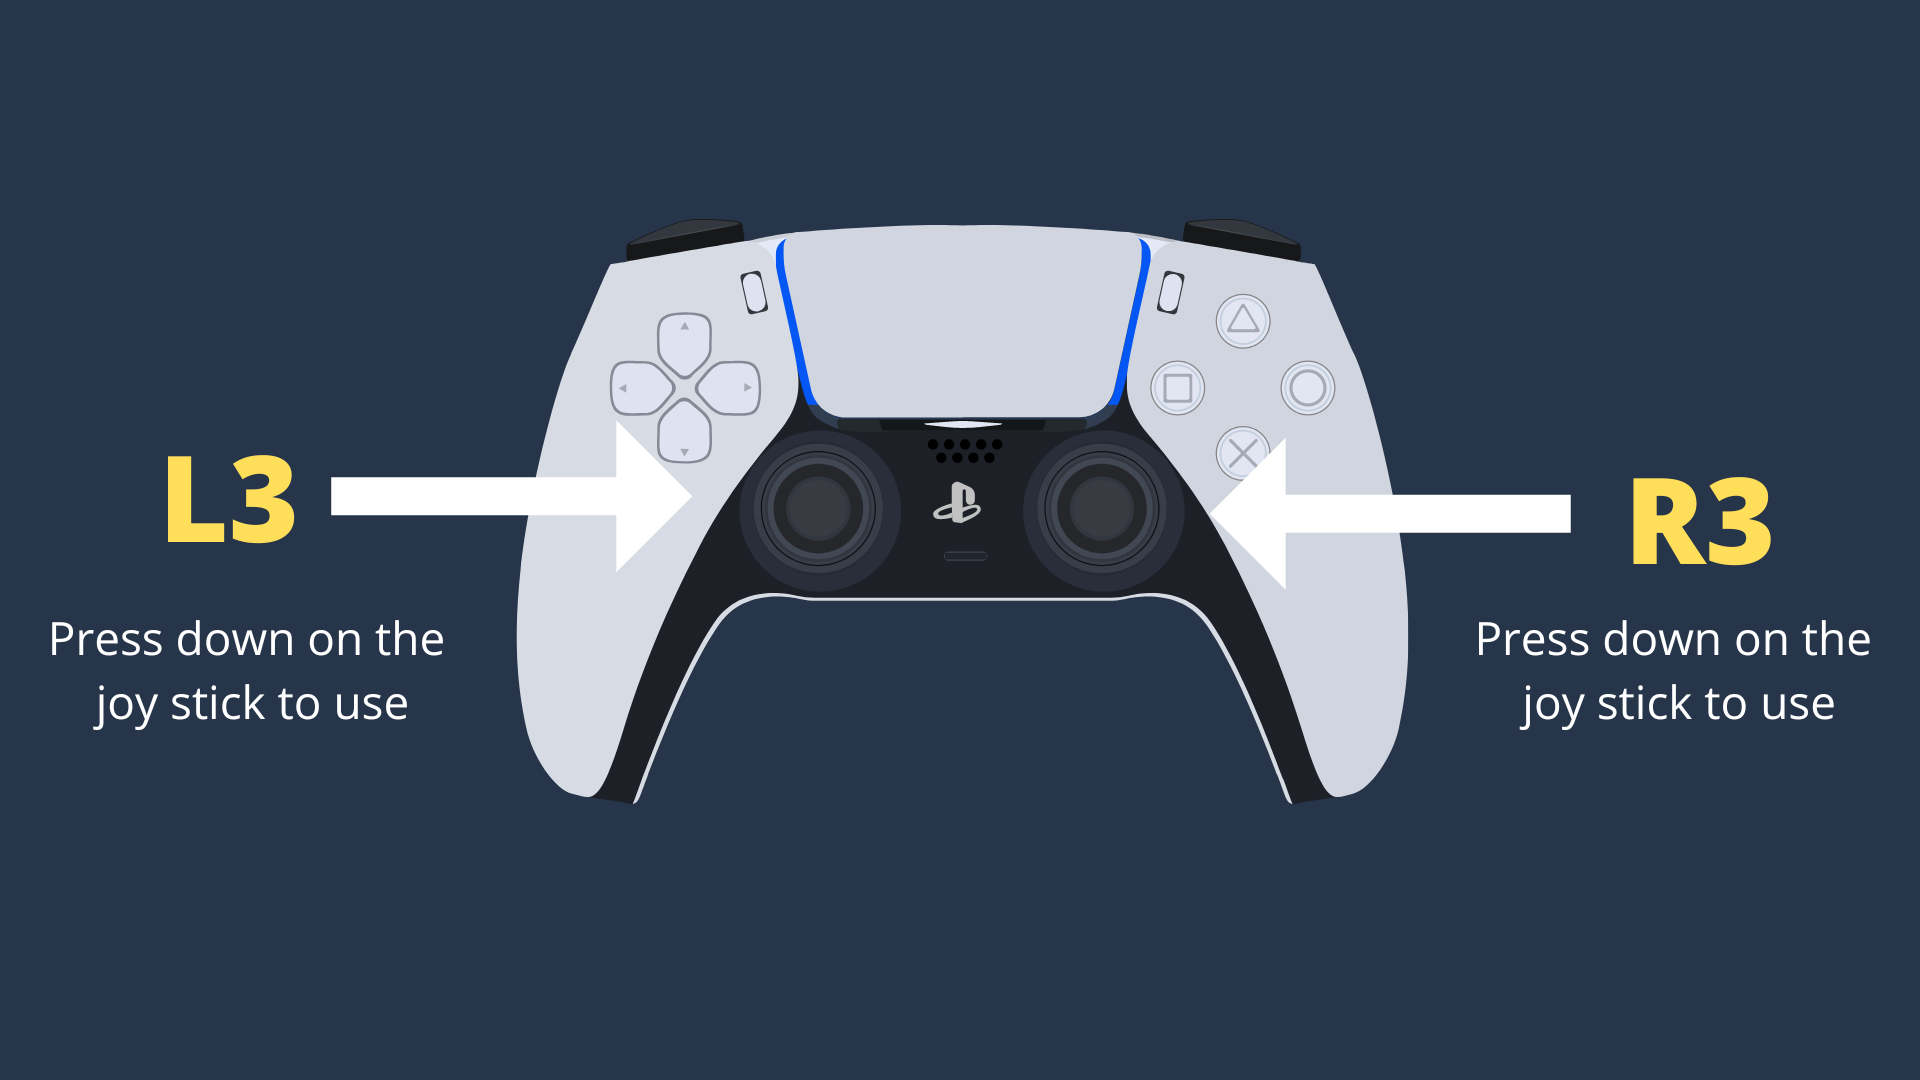 where-is-r3-on-ps5-controller-and-what-is-it-used-for-decortweaks